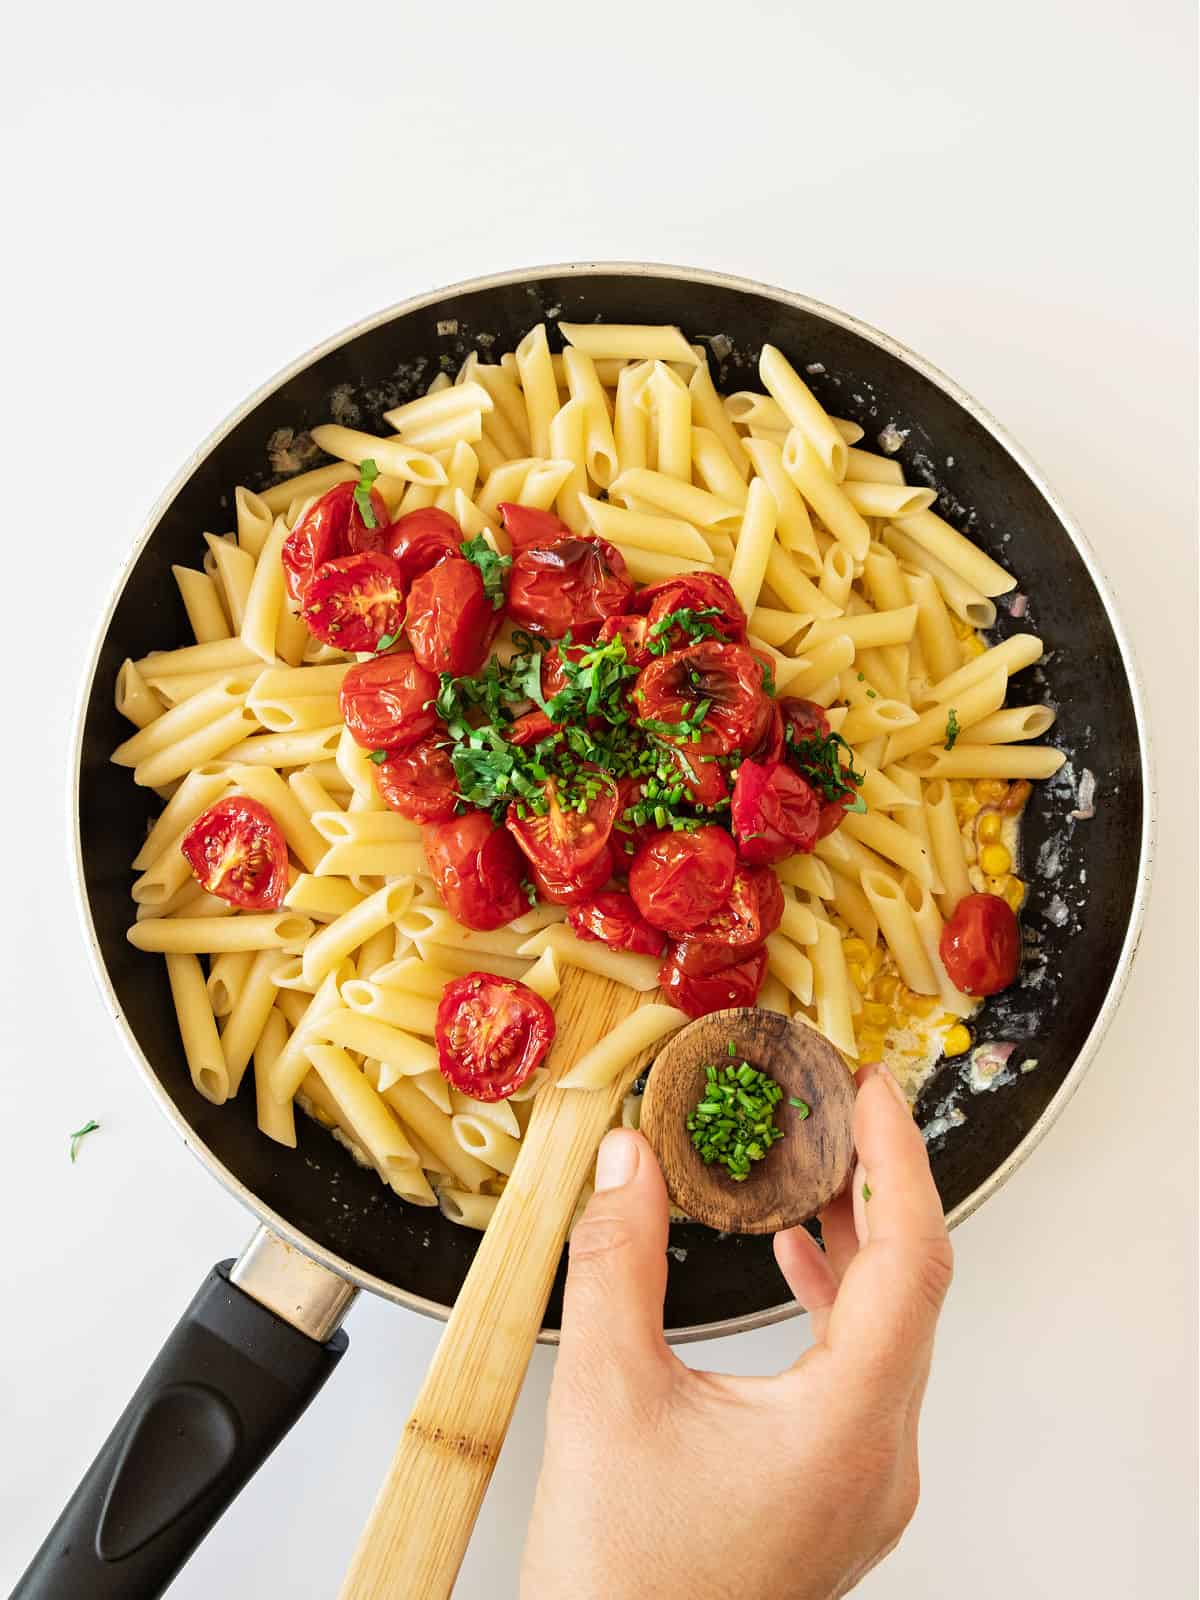 Adding herbs to short pasta with tomatoes in a skillet. White surface.